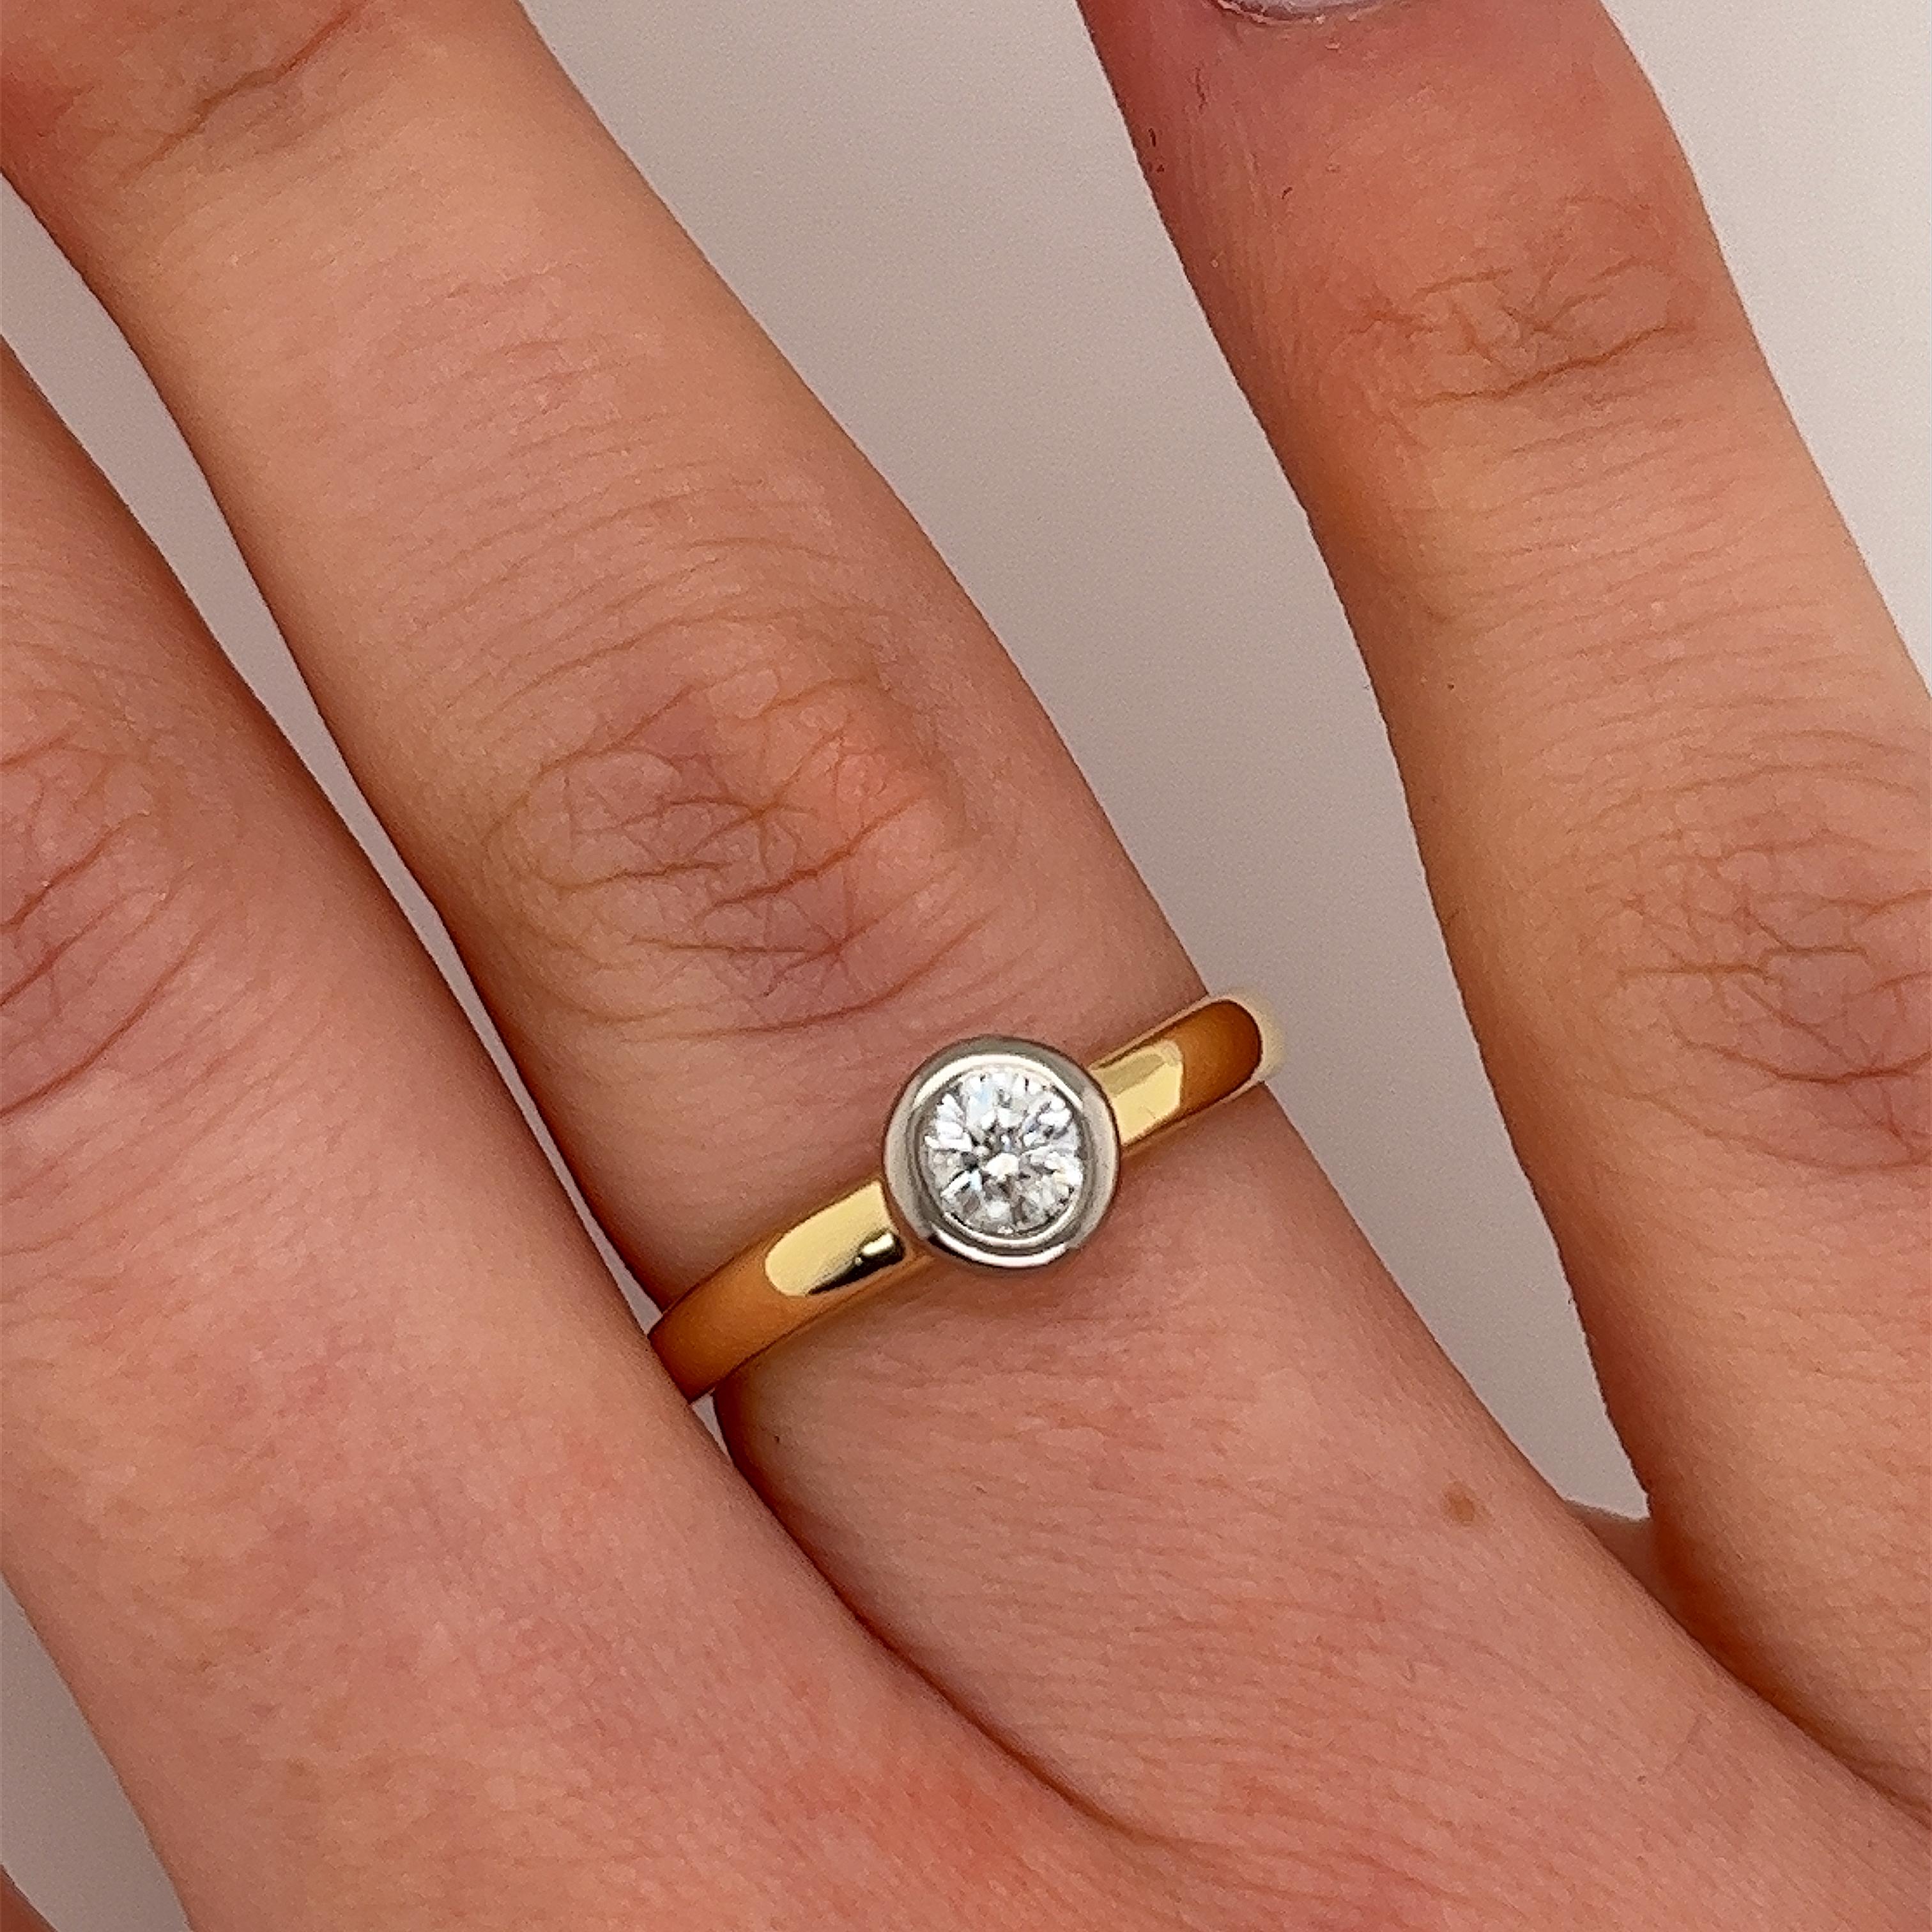 An vintage diamond ring for your engagement, 
set with 0.25ct centre stone natural round brilliant cut diamond 
in an 18ct white and yellow gold setting.
Total Diamond Weight: 0.25ct
Diamond Colour: H
Diamond Clarity: SI1
Width of Band: 2mm
Width of